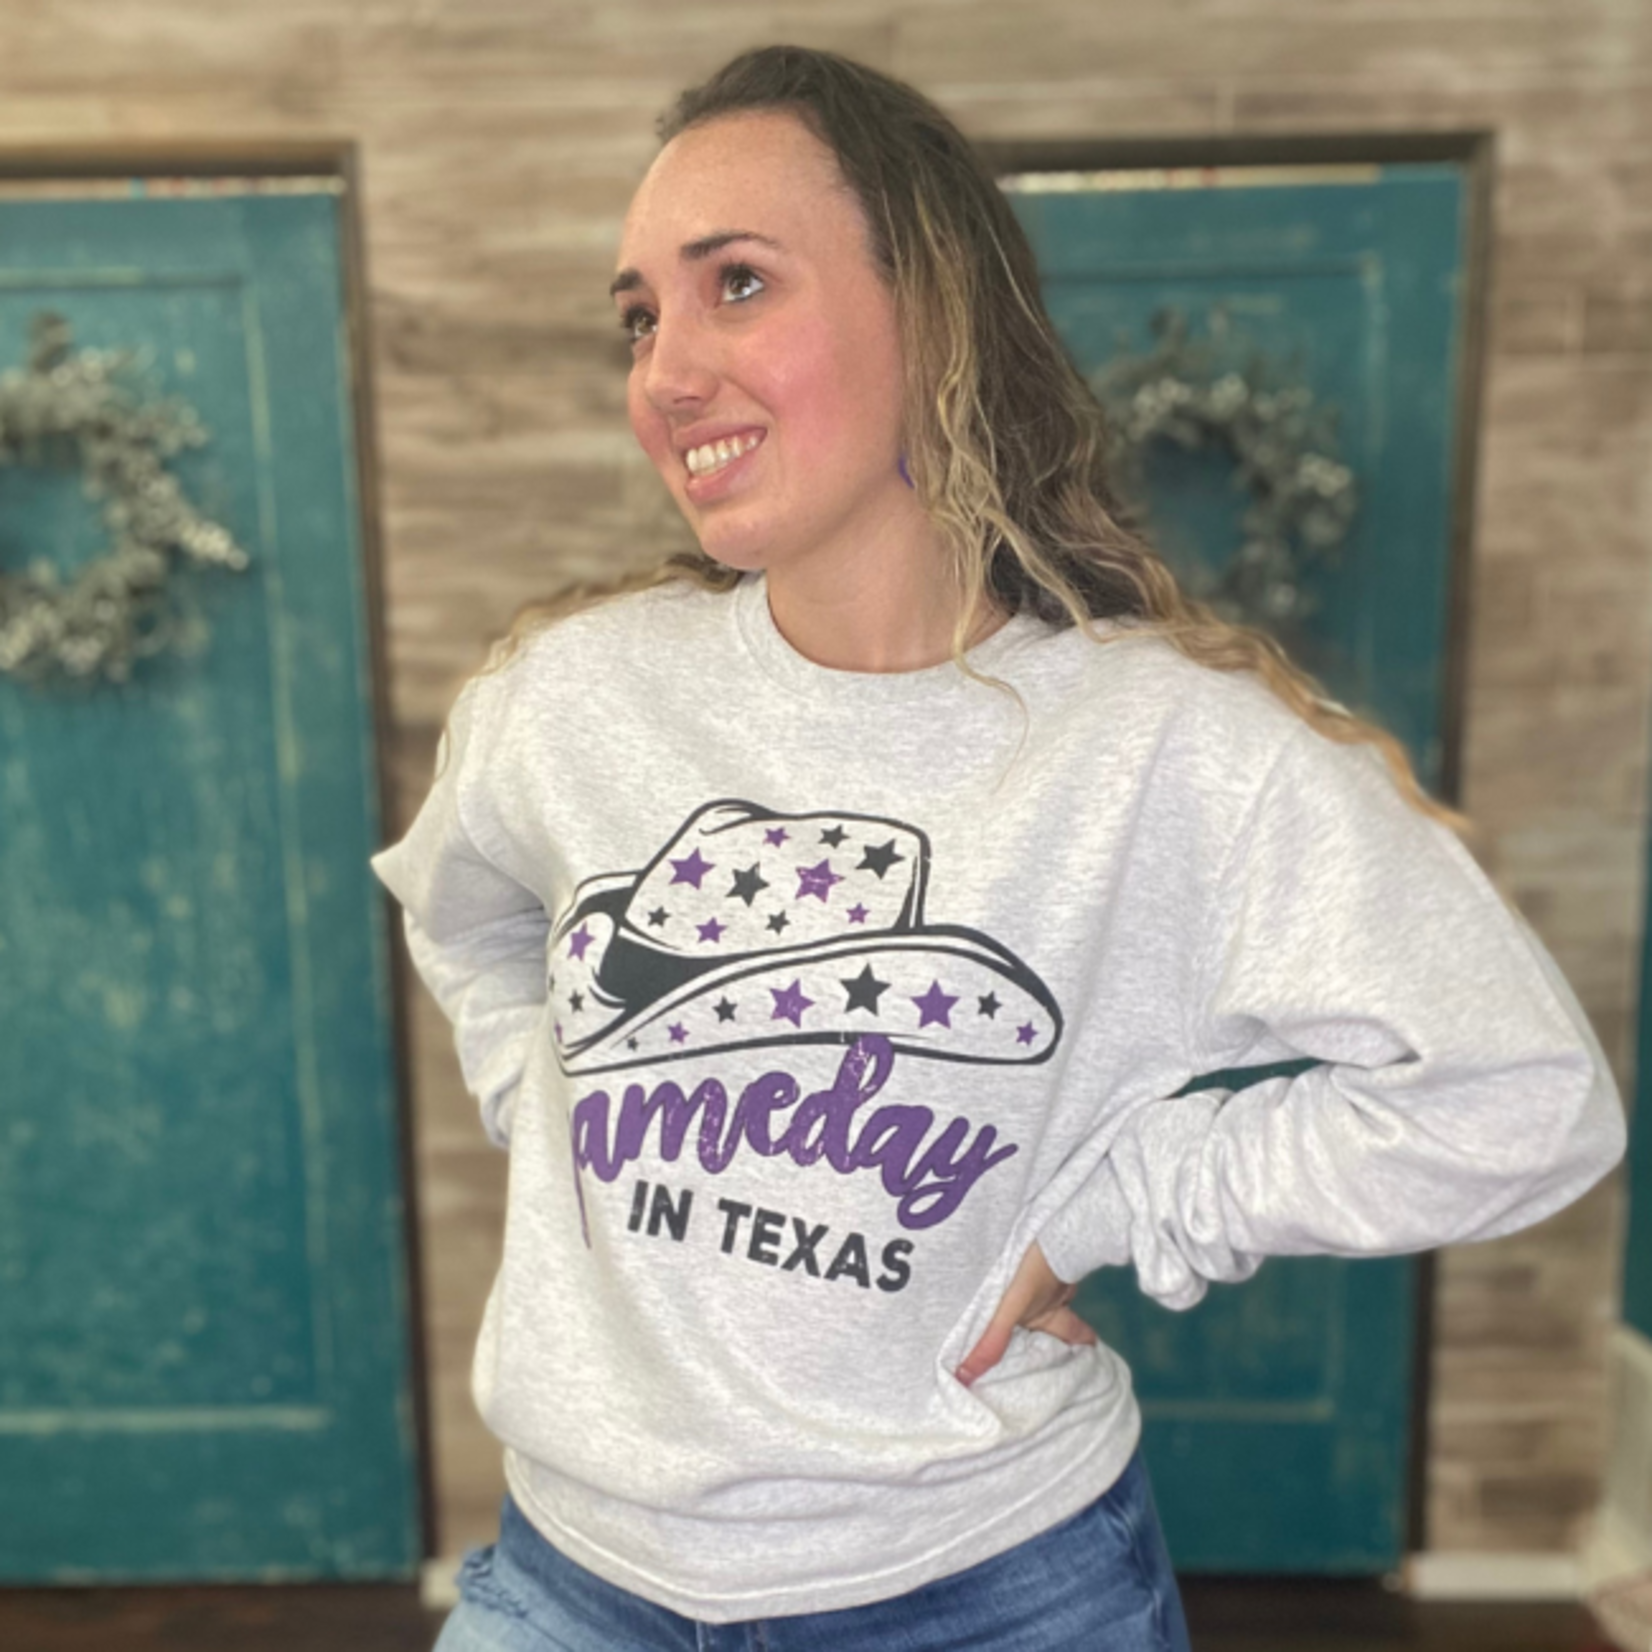 Bling N Sports Gameday in Texas Sweater